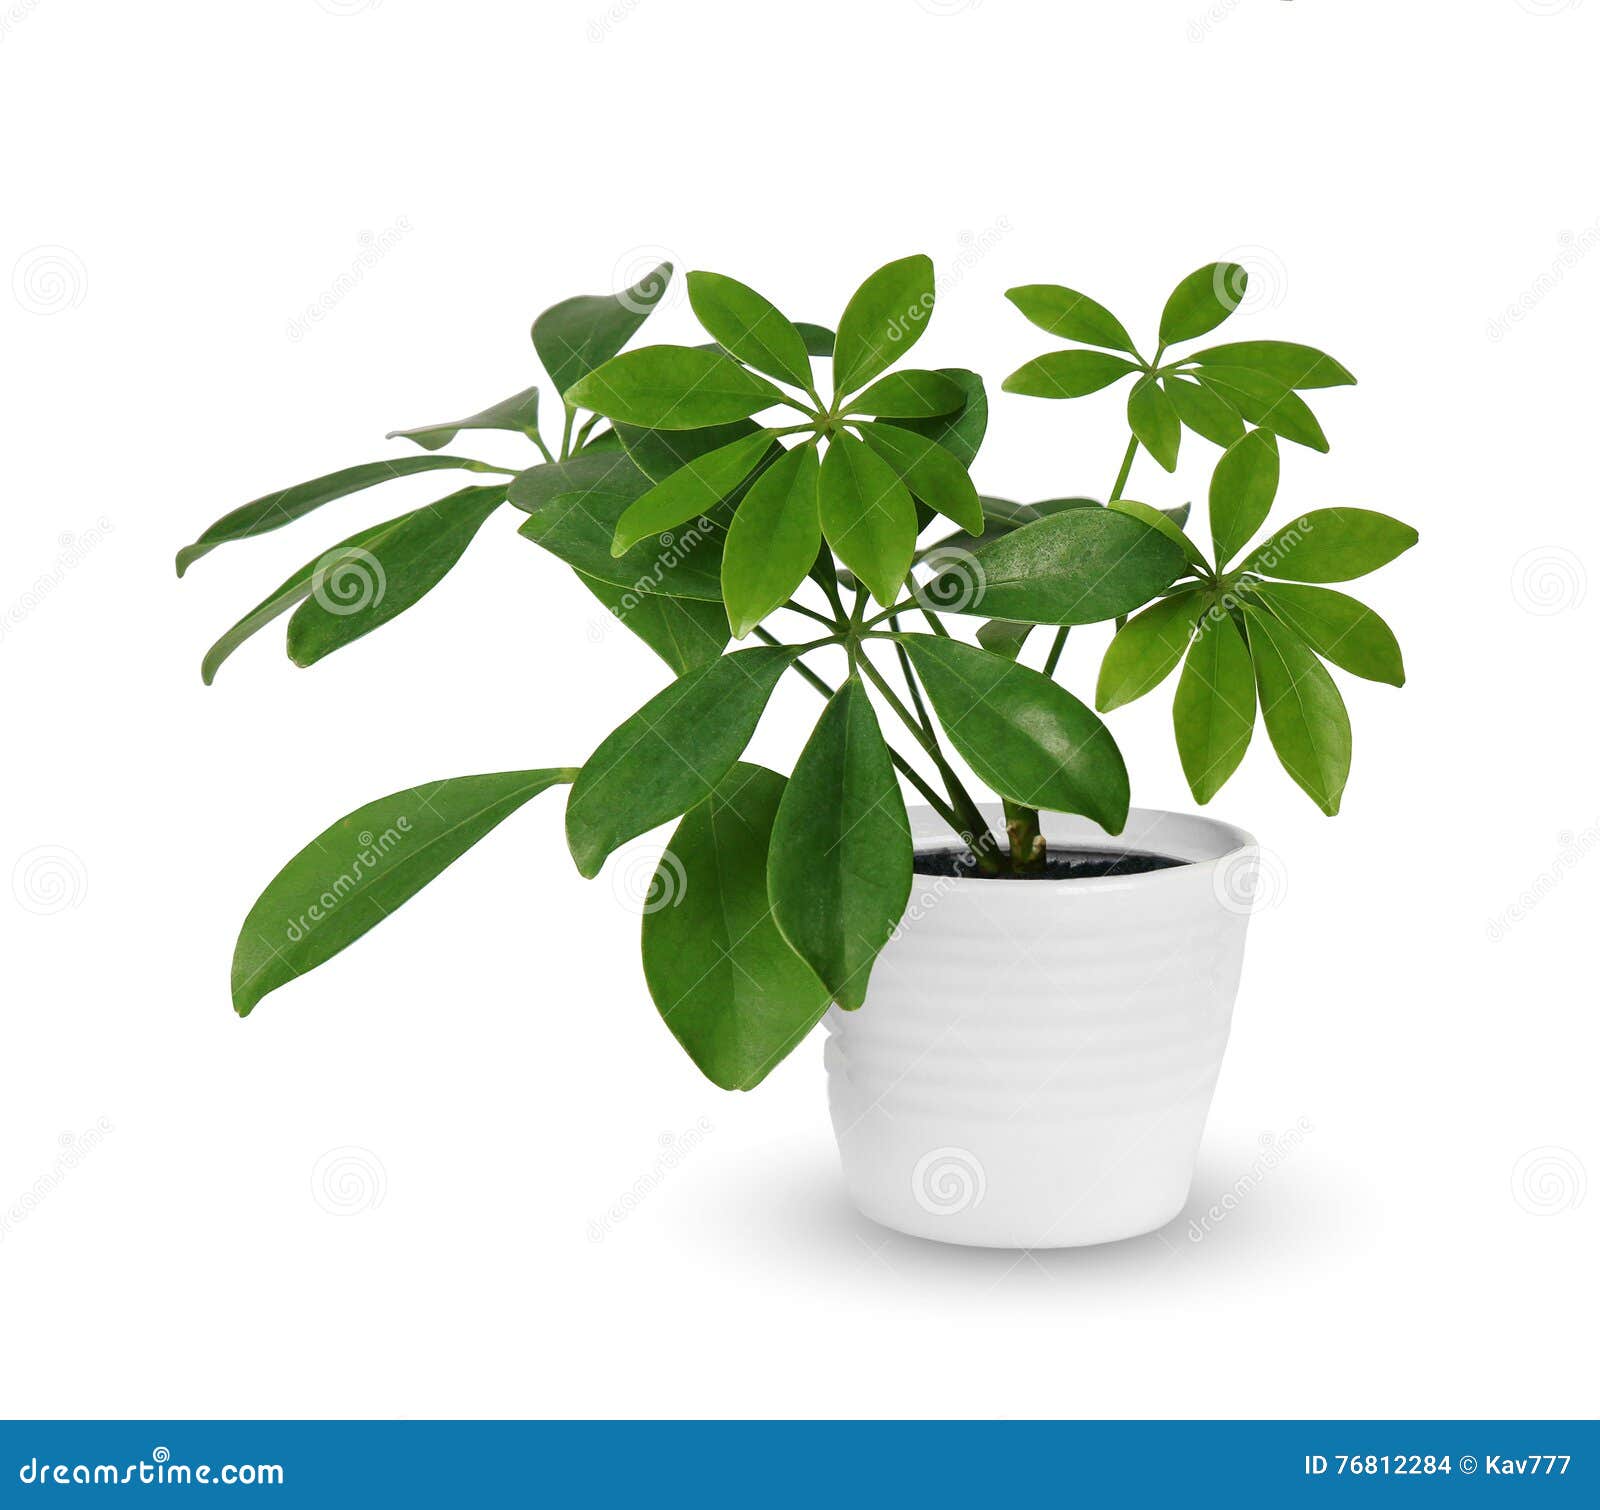 houseplant - young schefflera a potted plant  over white